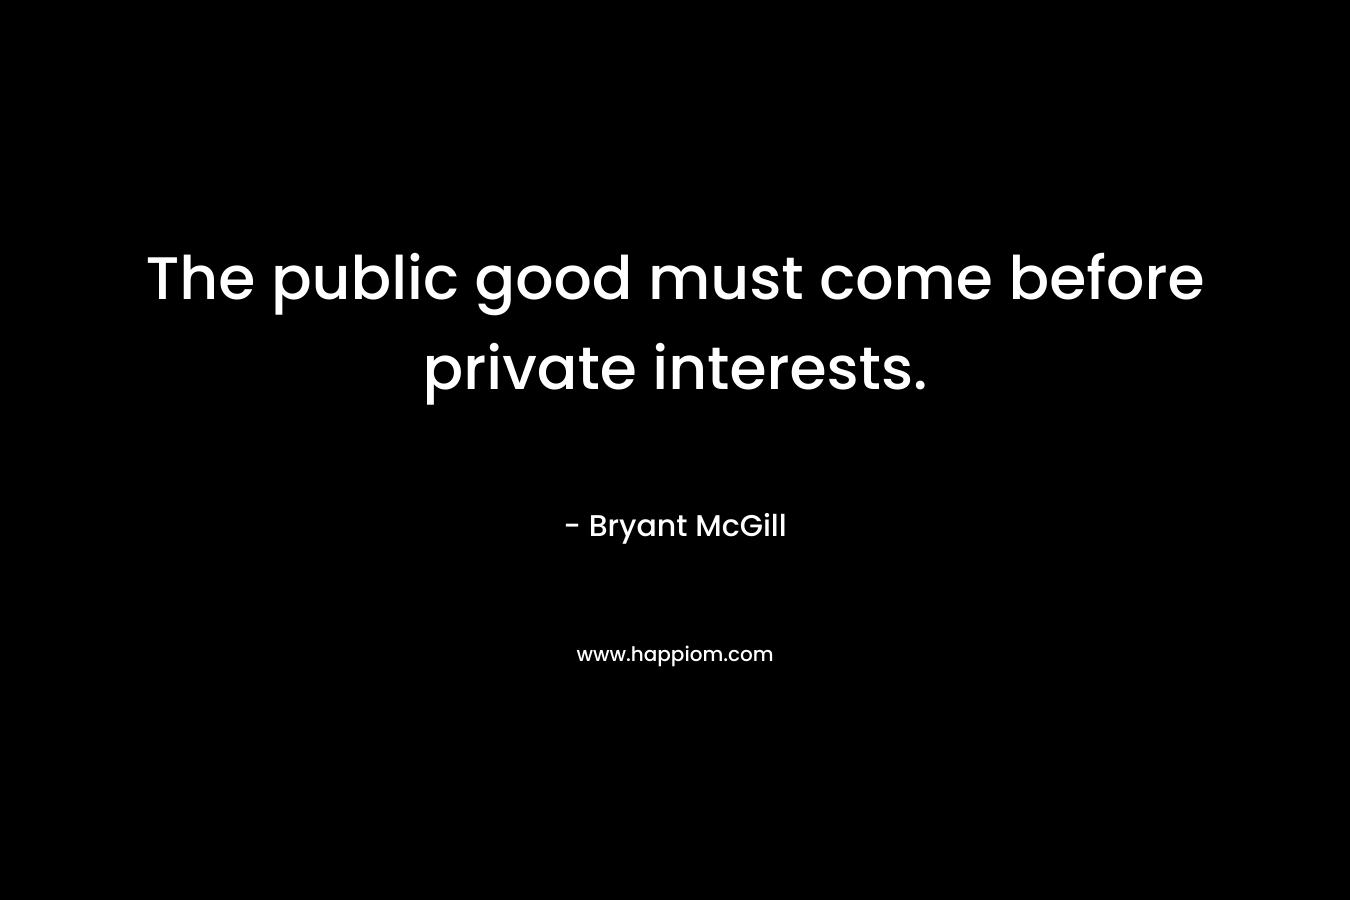 The public good must come before private interests. – Bryant McGill